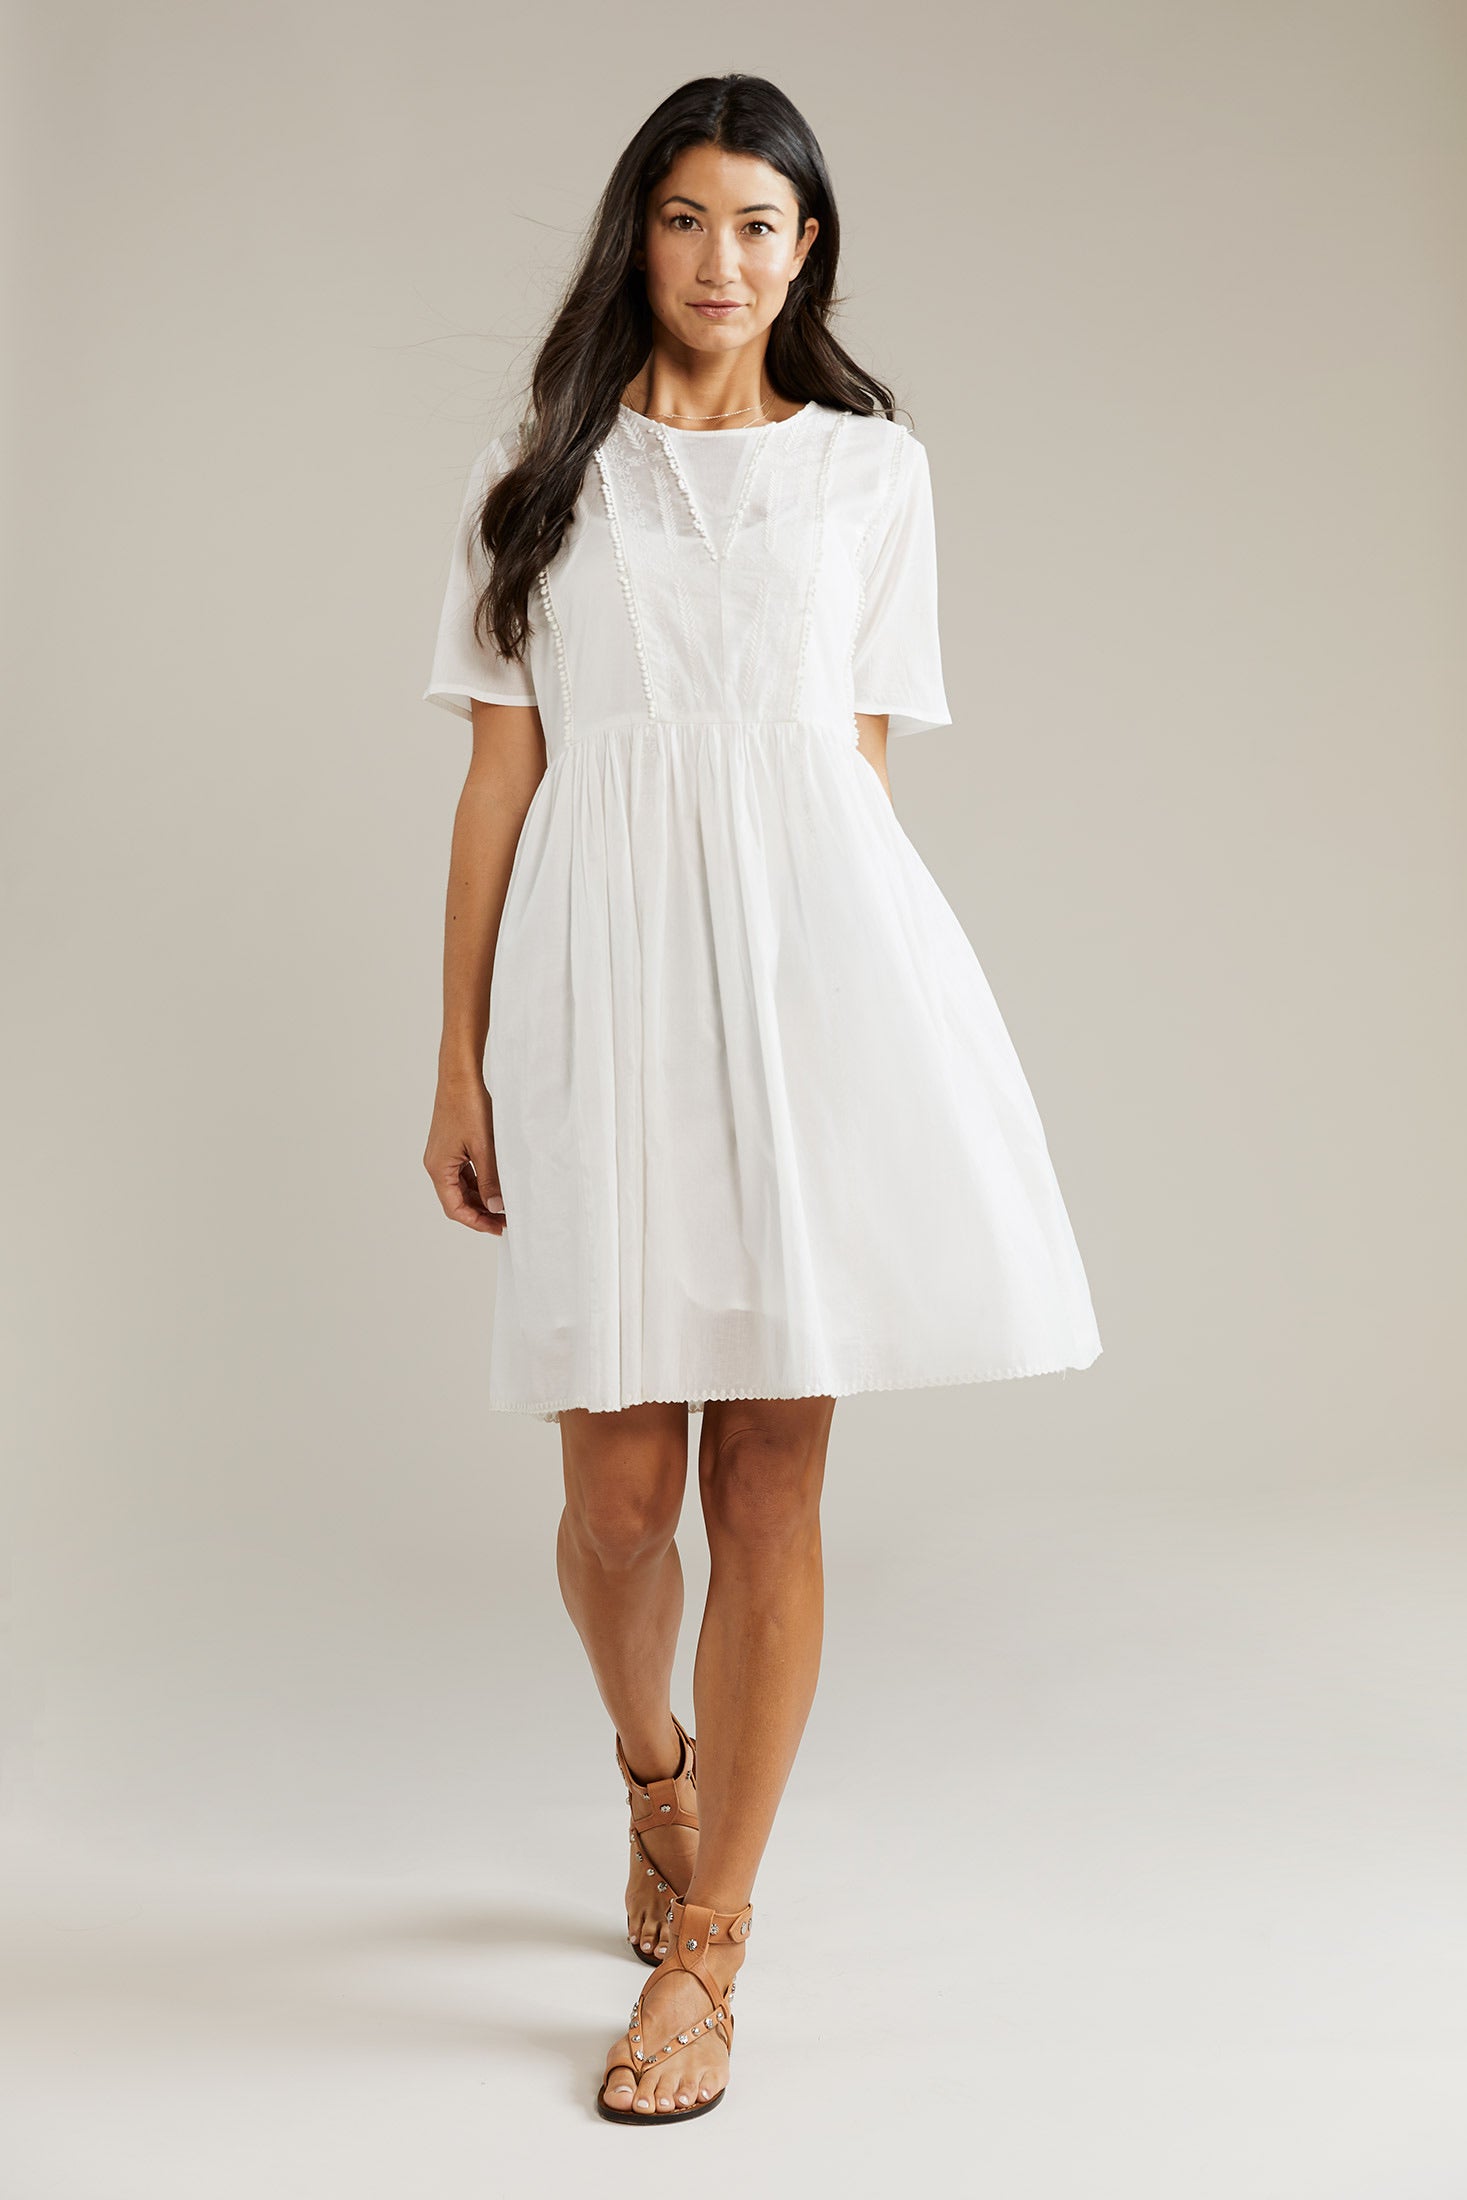 Into the Frey Embroidered Dress - White